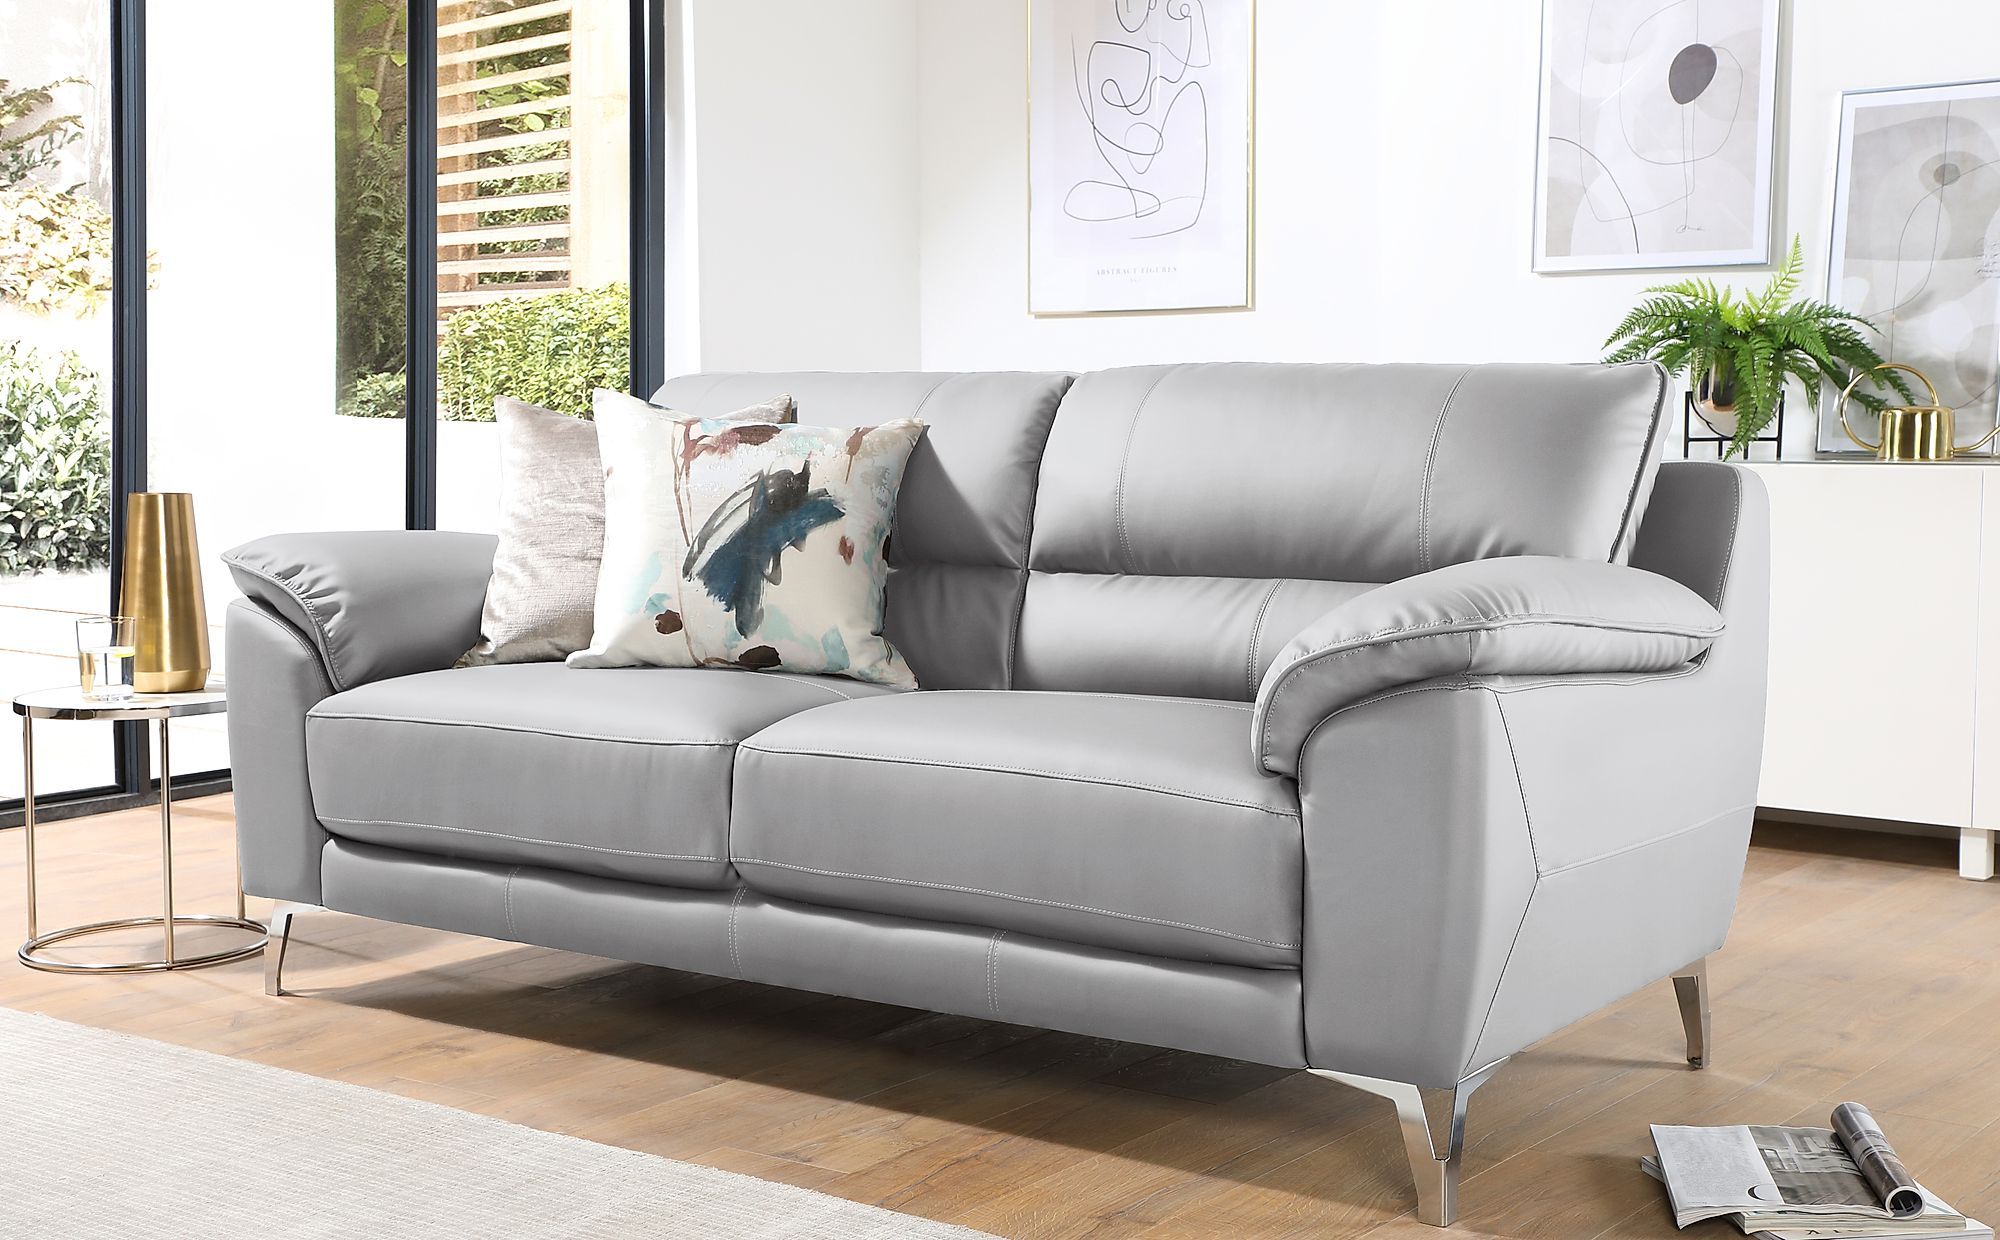 Madrid Light Grey Leather 3 Seater Sofa | Furniture Choice Within Modern Light Grey Loveseat Sofas (Gallery 2 of 20)